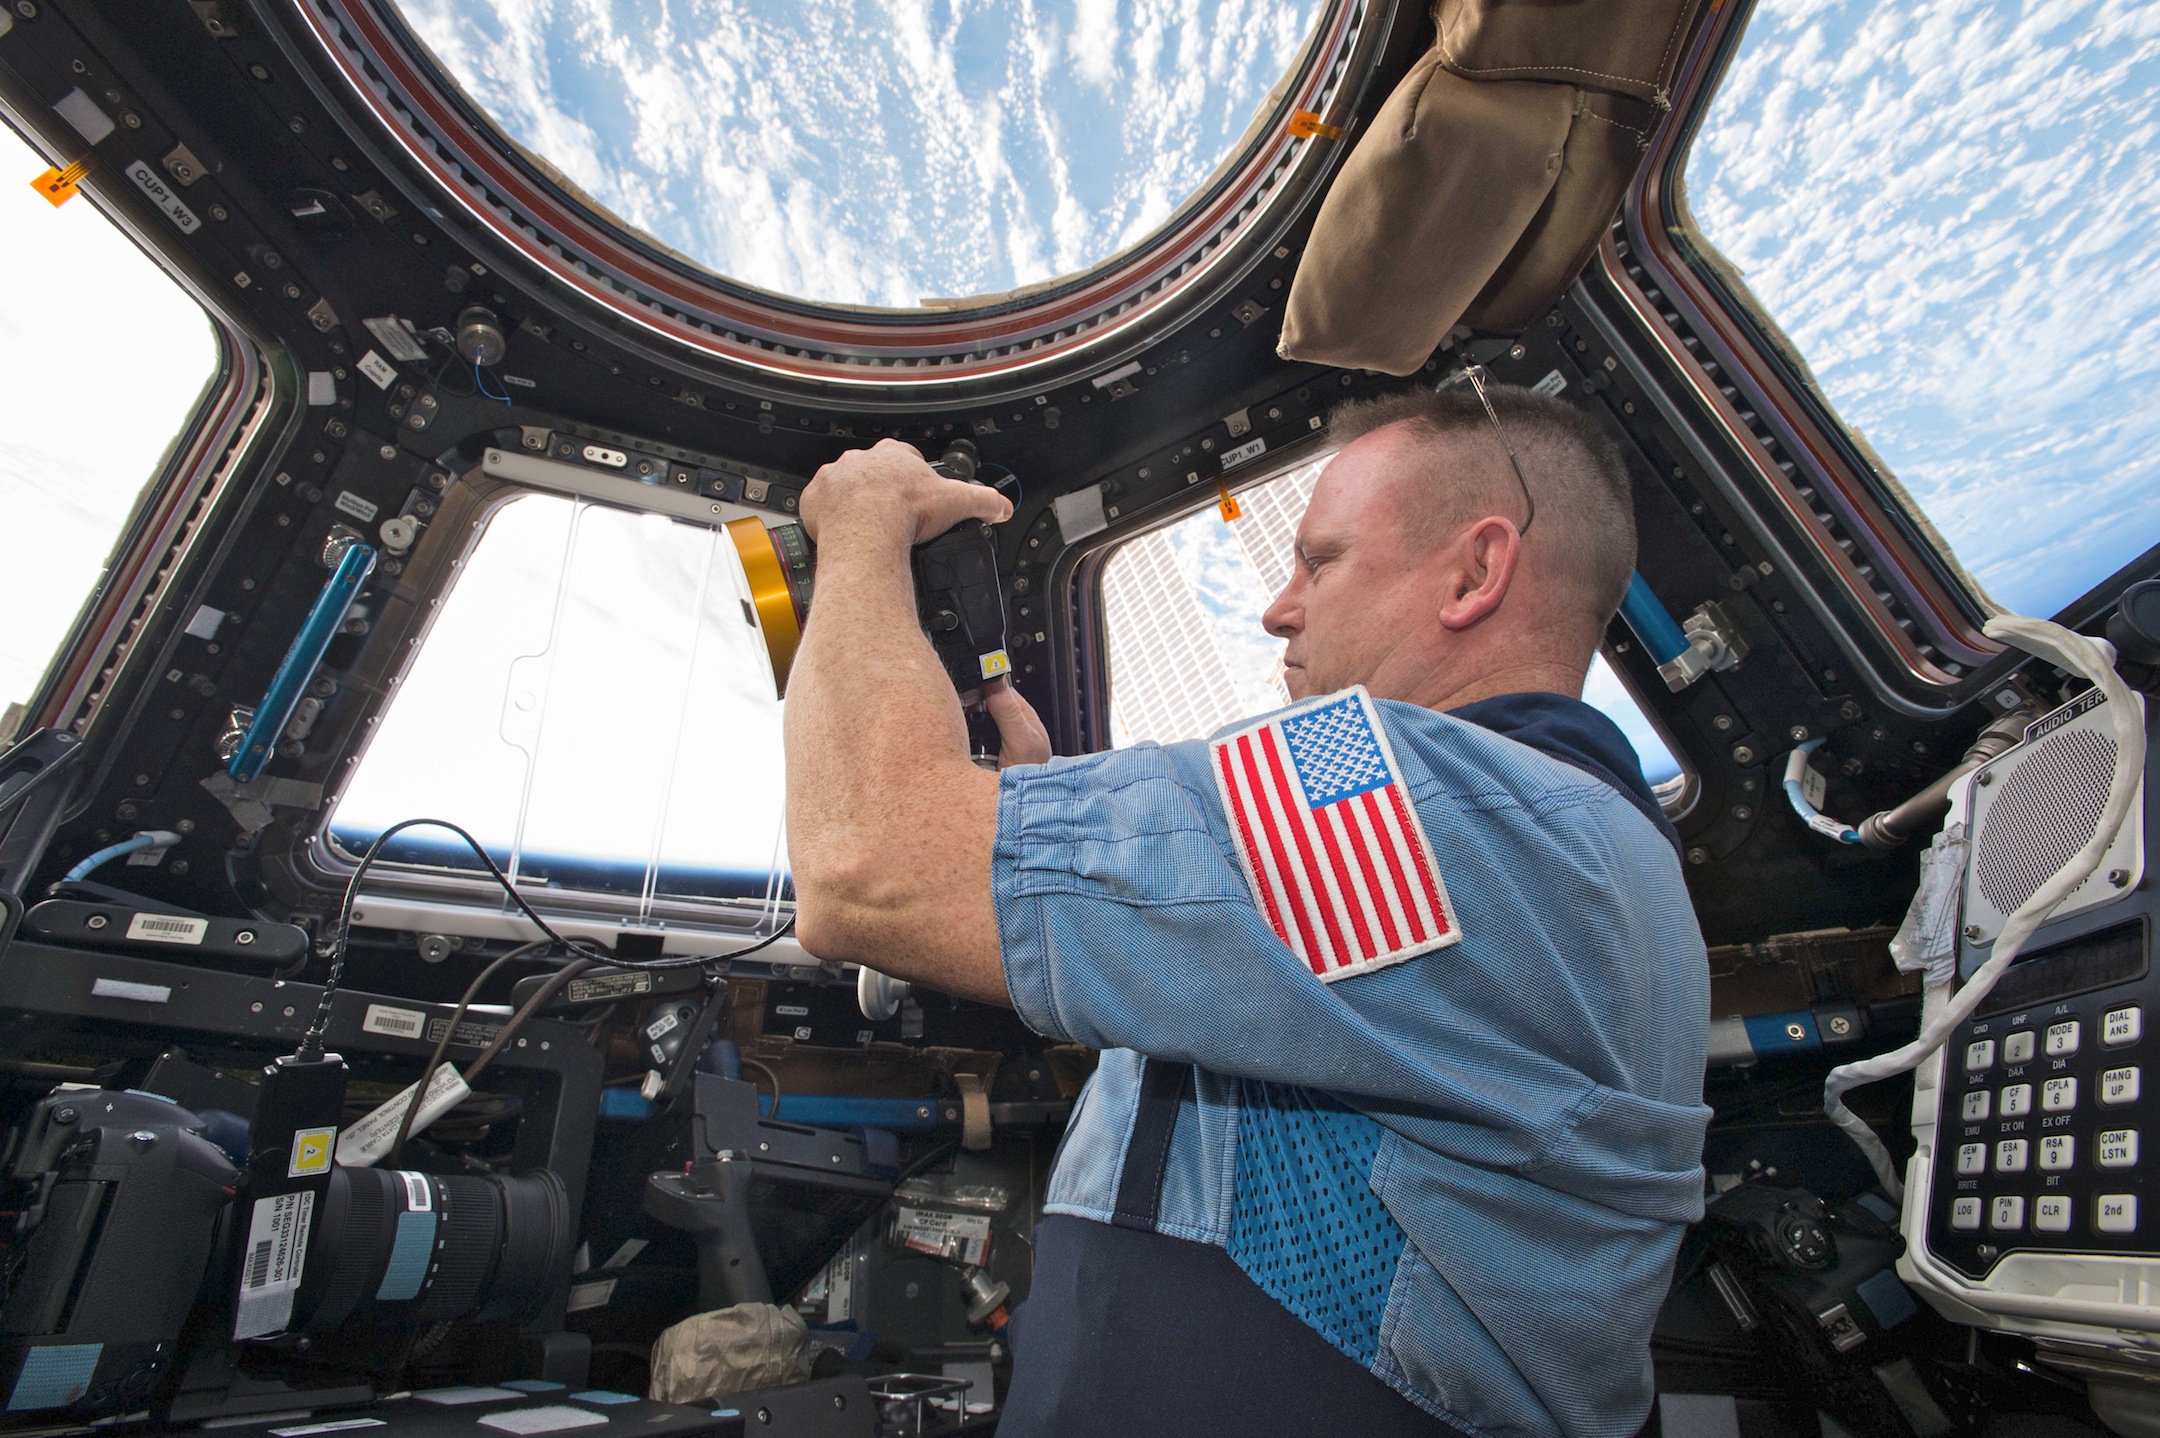 NASA Commander Barry ‘Butch’ Wilmore shoots a scene with the IMAX camera through the window of the International Space Station’s Cupola Observation Module. (Courtesy of NASA)